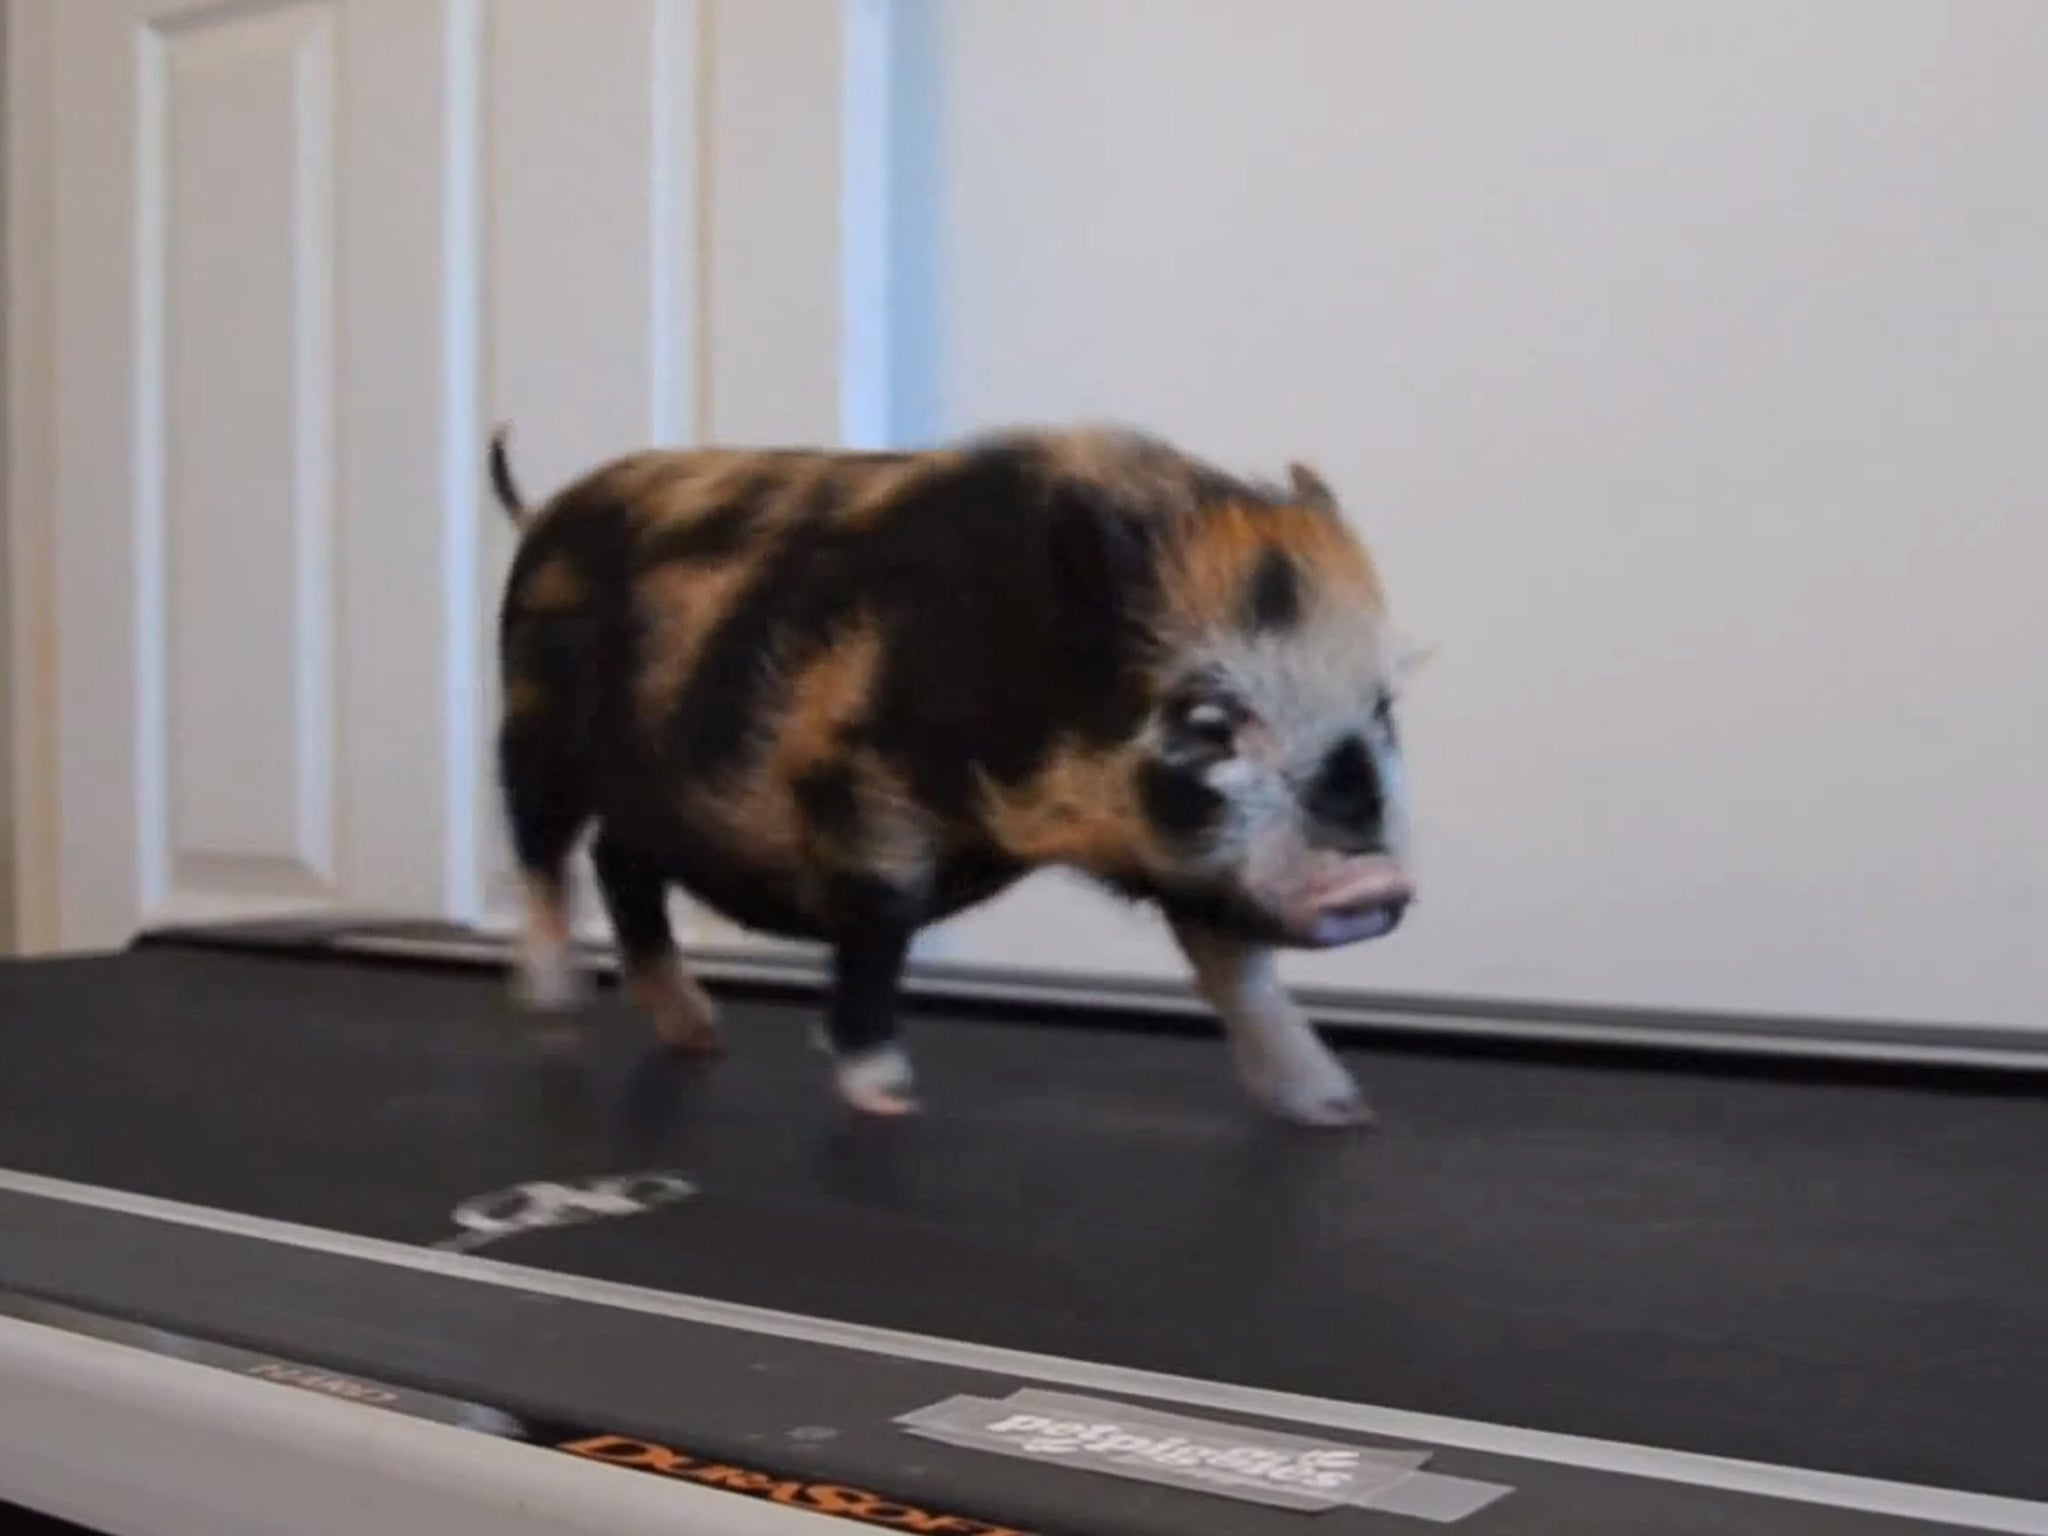 'Hey look at me! I'm a micro pig on a running machine!'